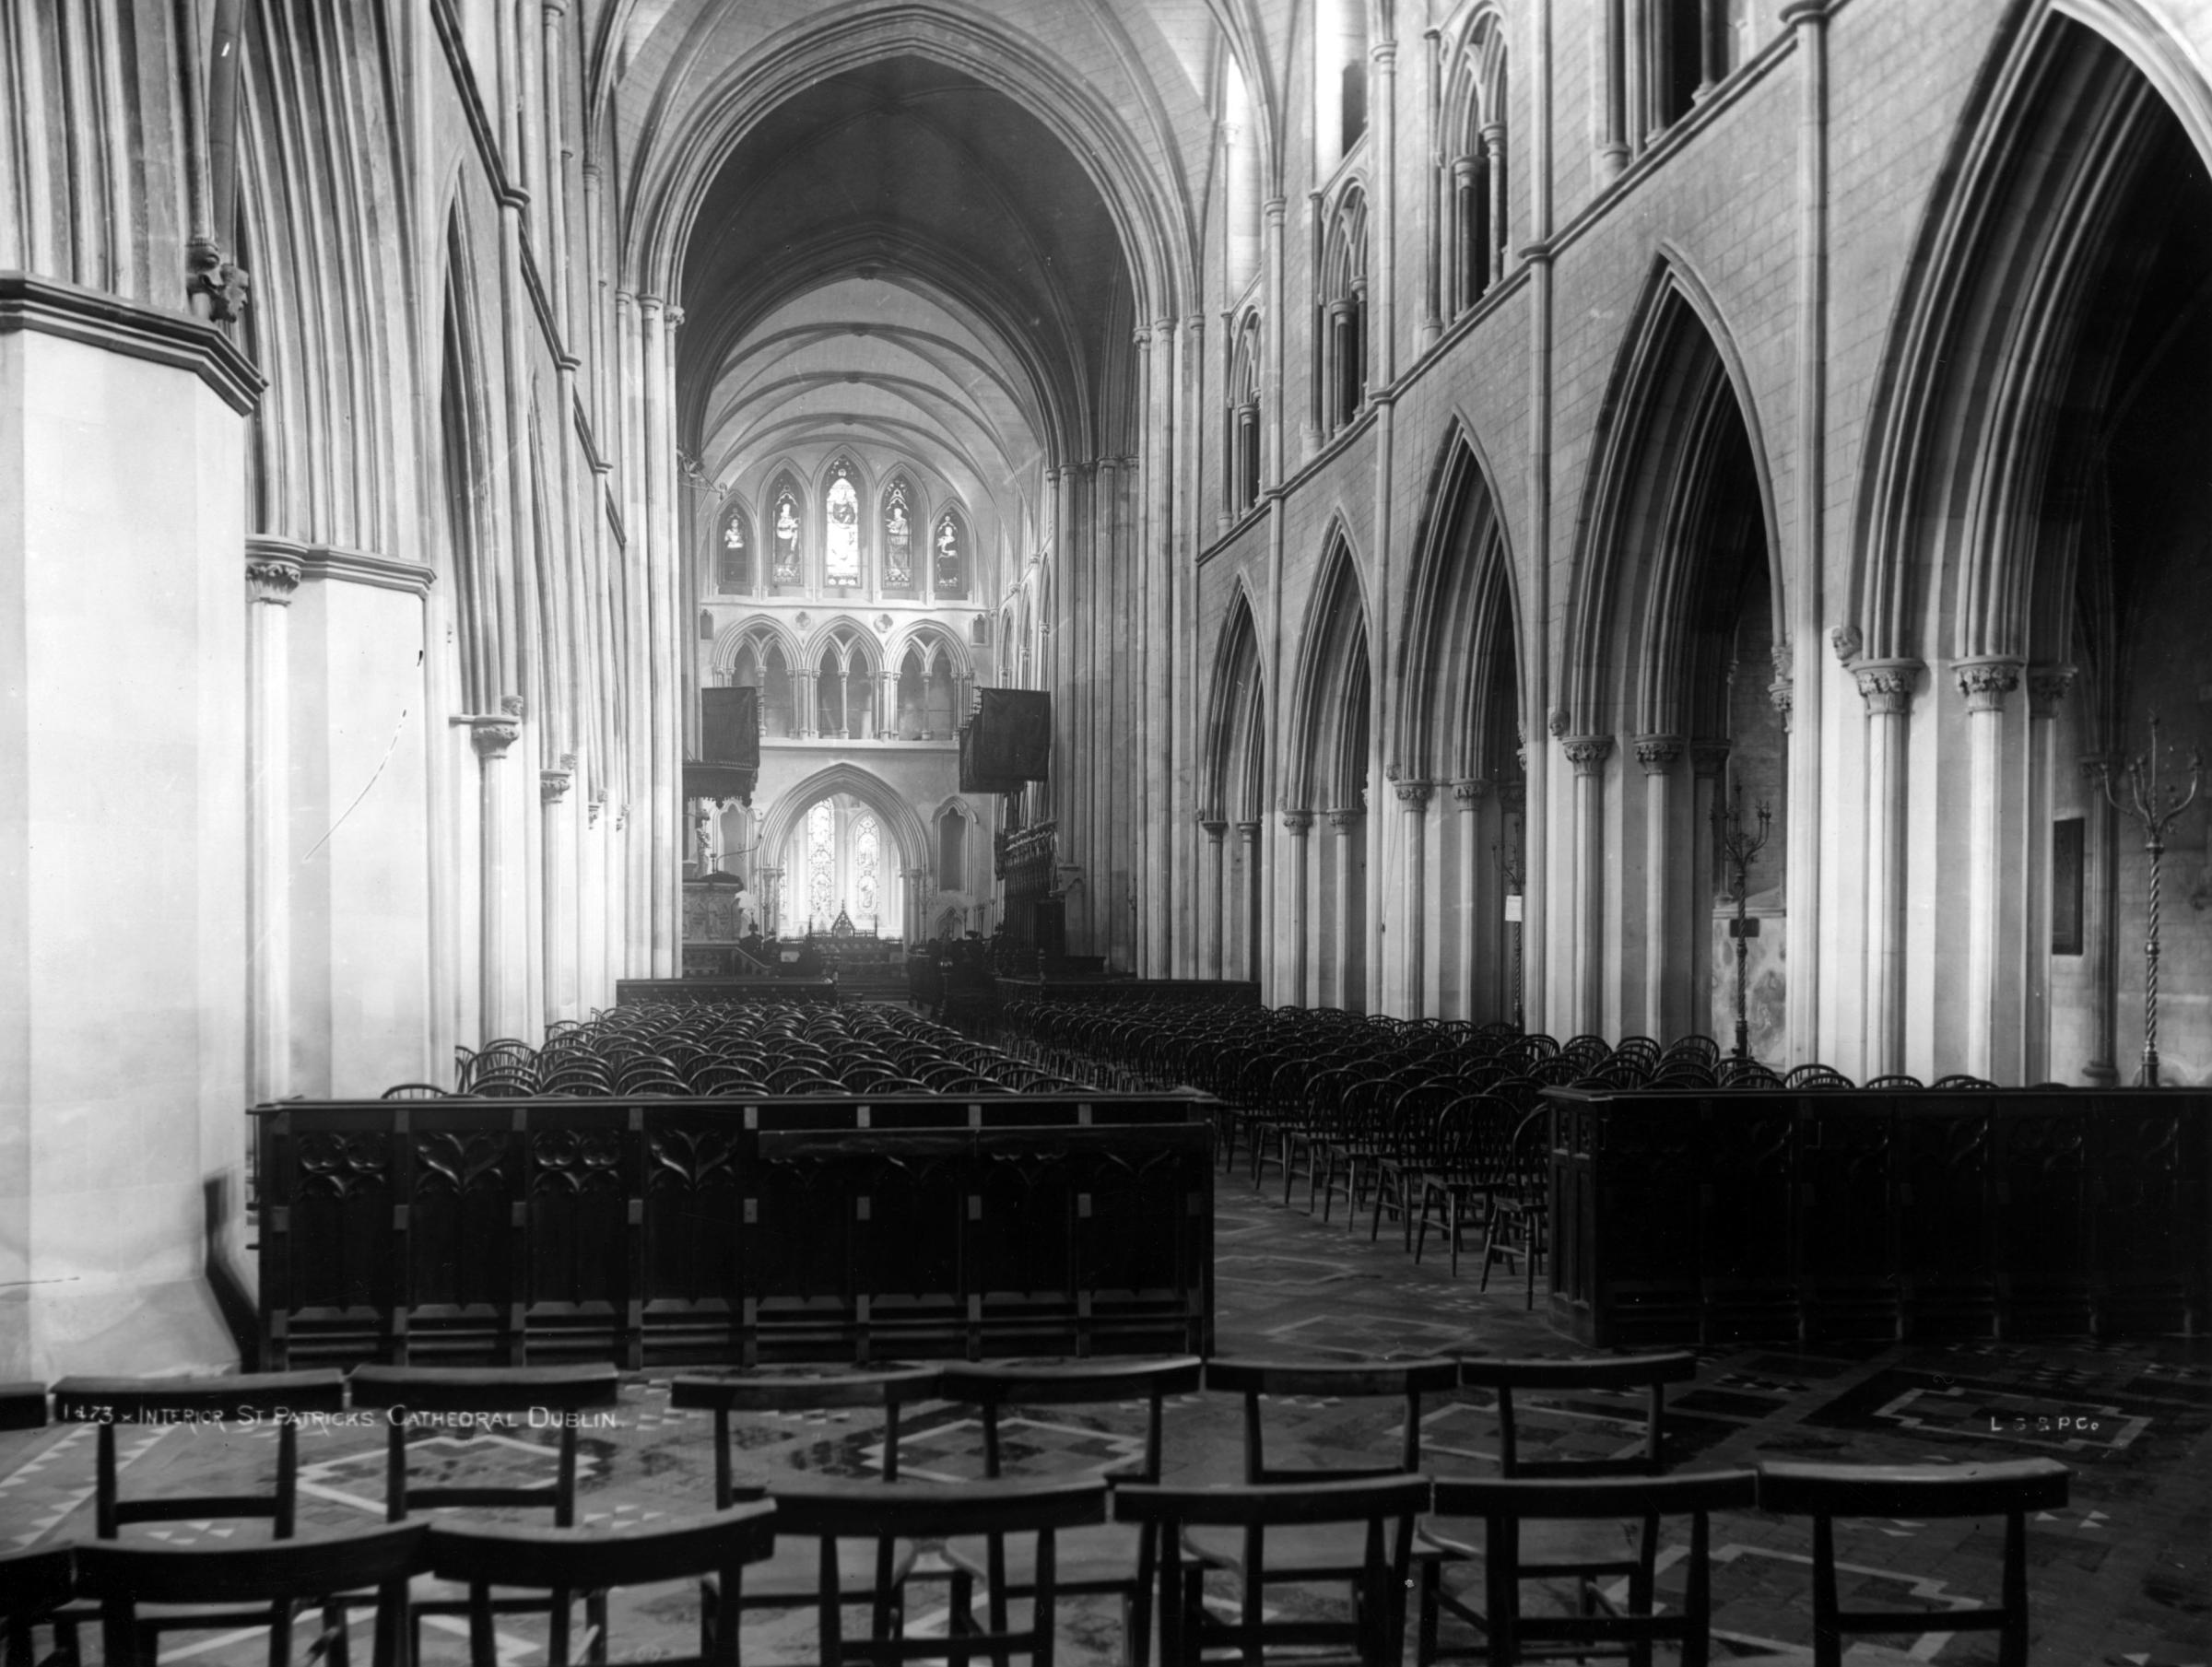 The interior of St Patrick's Cathedral in Dublin, circa 1910.